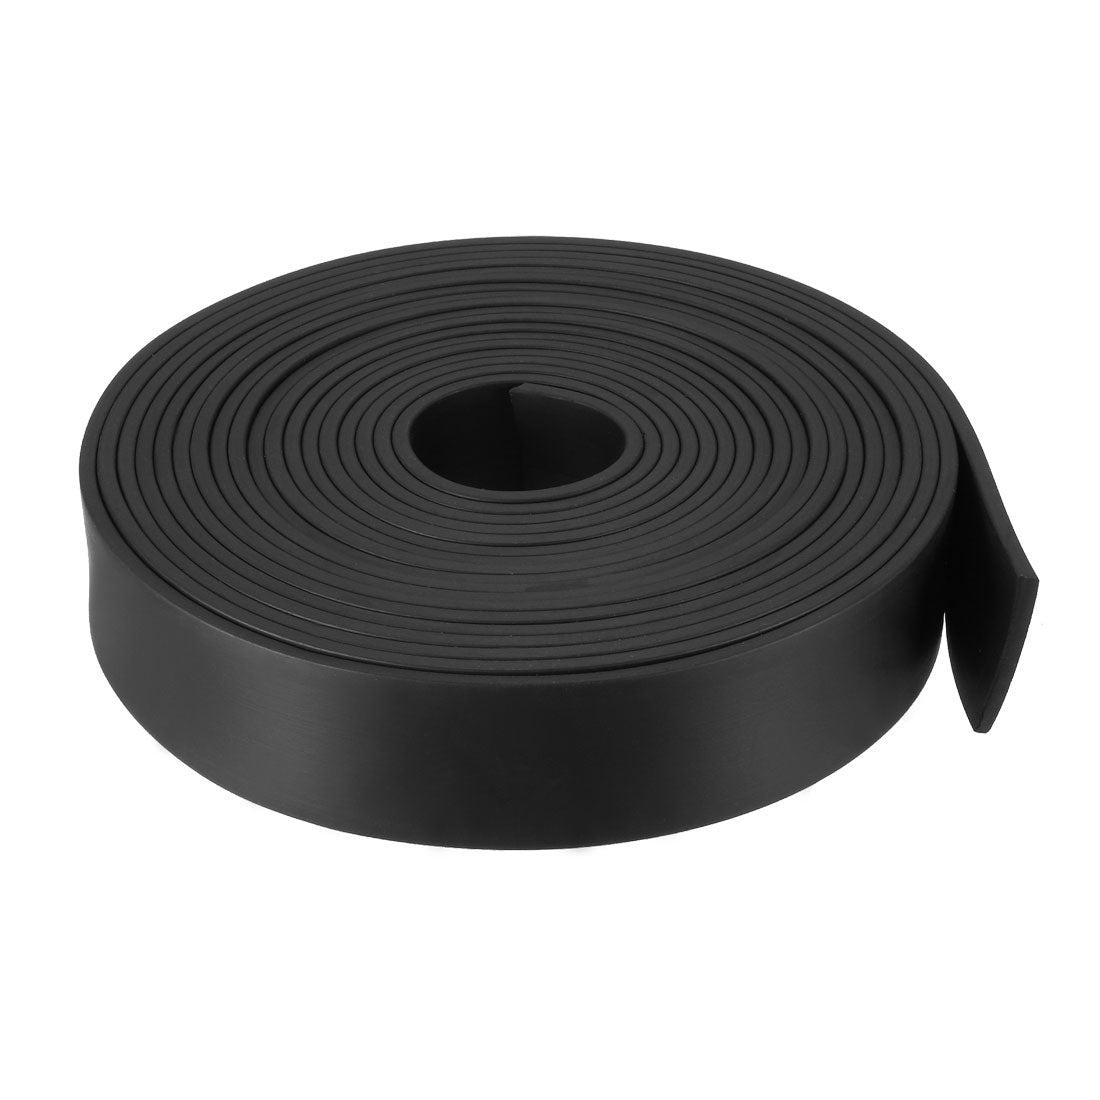 uxcell Uxcell Solid Rectangle Rubber Seal Strip 30mm Wide 3mm Thick, 5 Meters Long Black